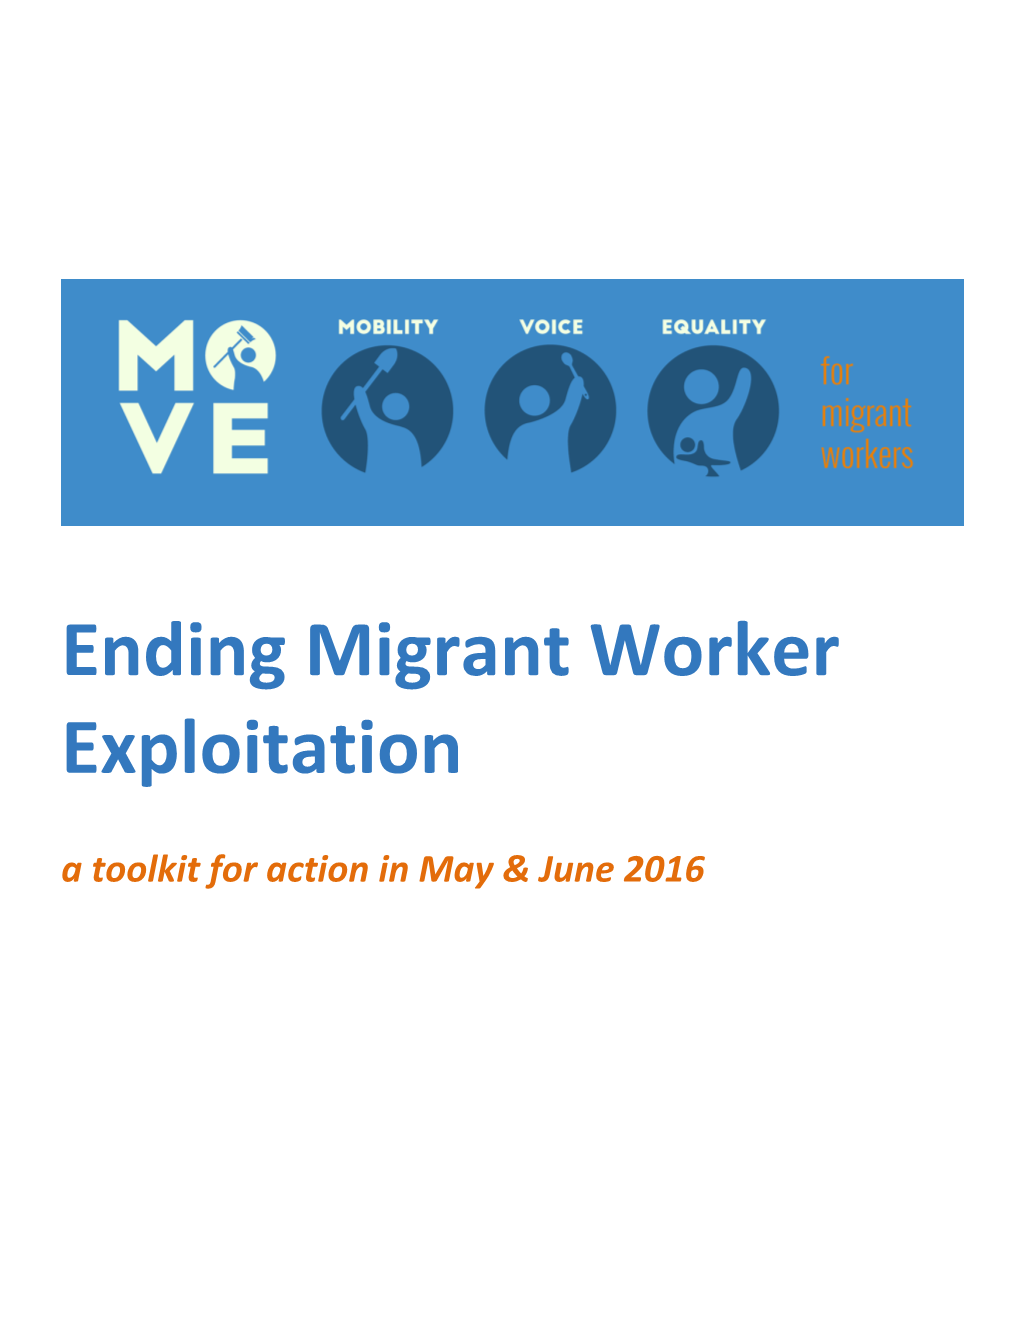 Ending Migrant Worker Exploitation a Toolkit for Action in May & June 2016